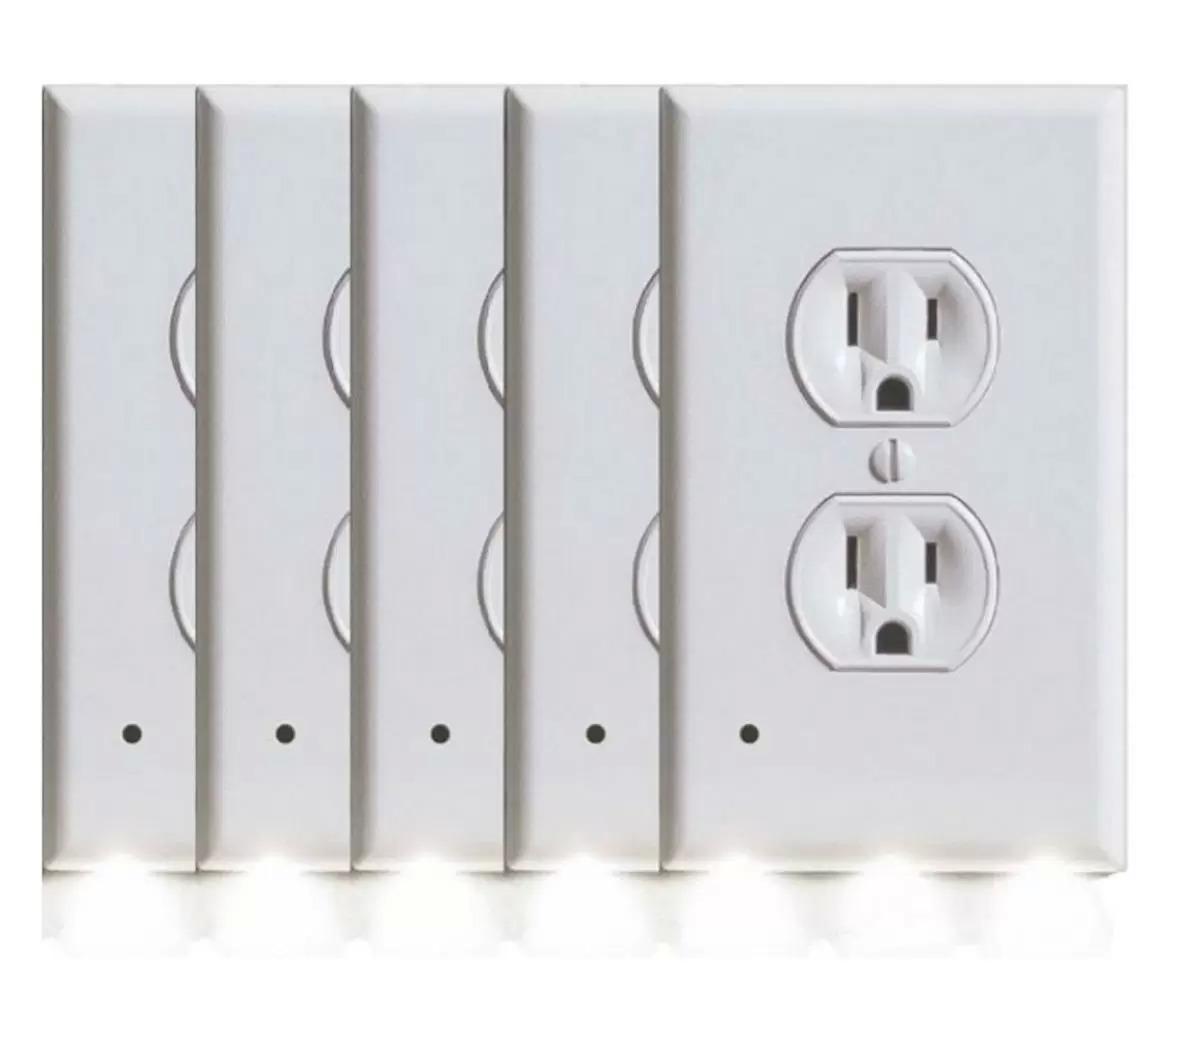 BH Outlet Covers with Built-In LED Night Light 5 Pack for $13.99 Shipped